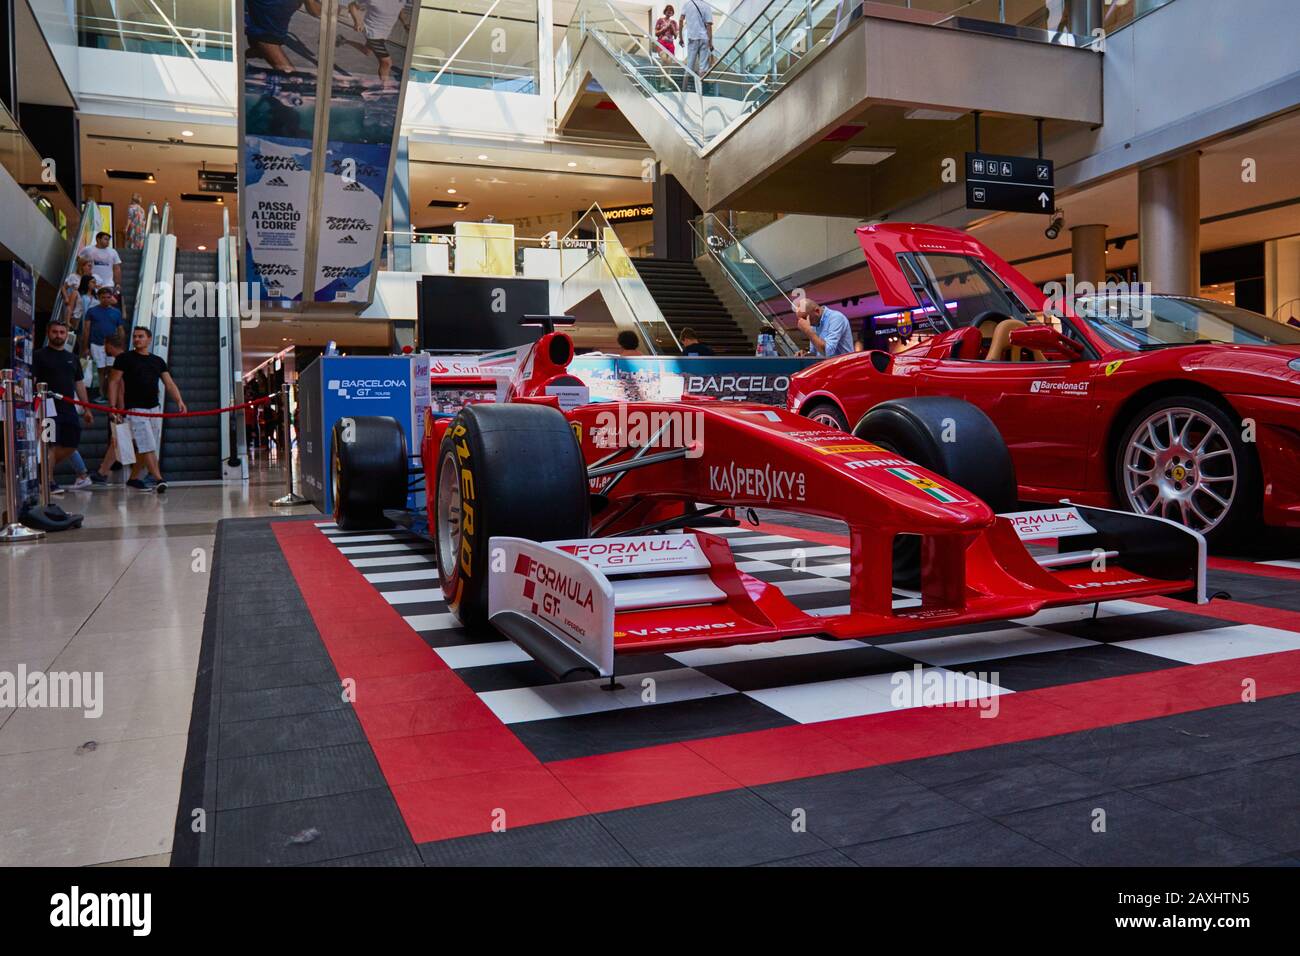 Vintage Formula 1 Race Car High Resolution Stock Photography and Images -  Alamy